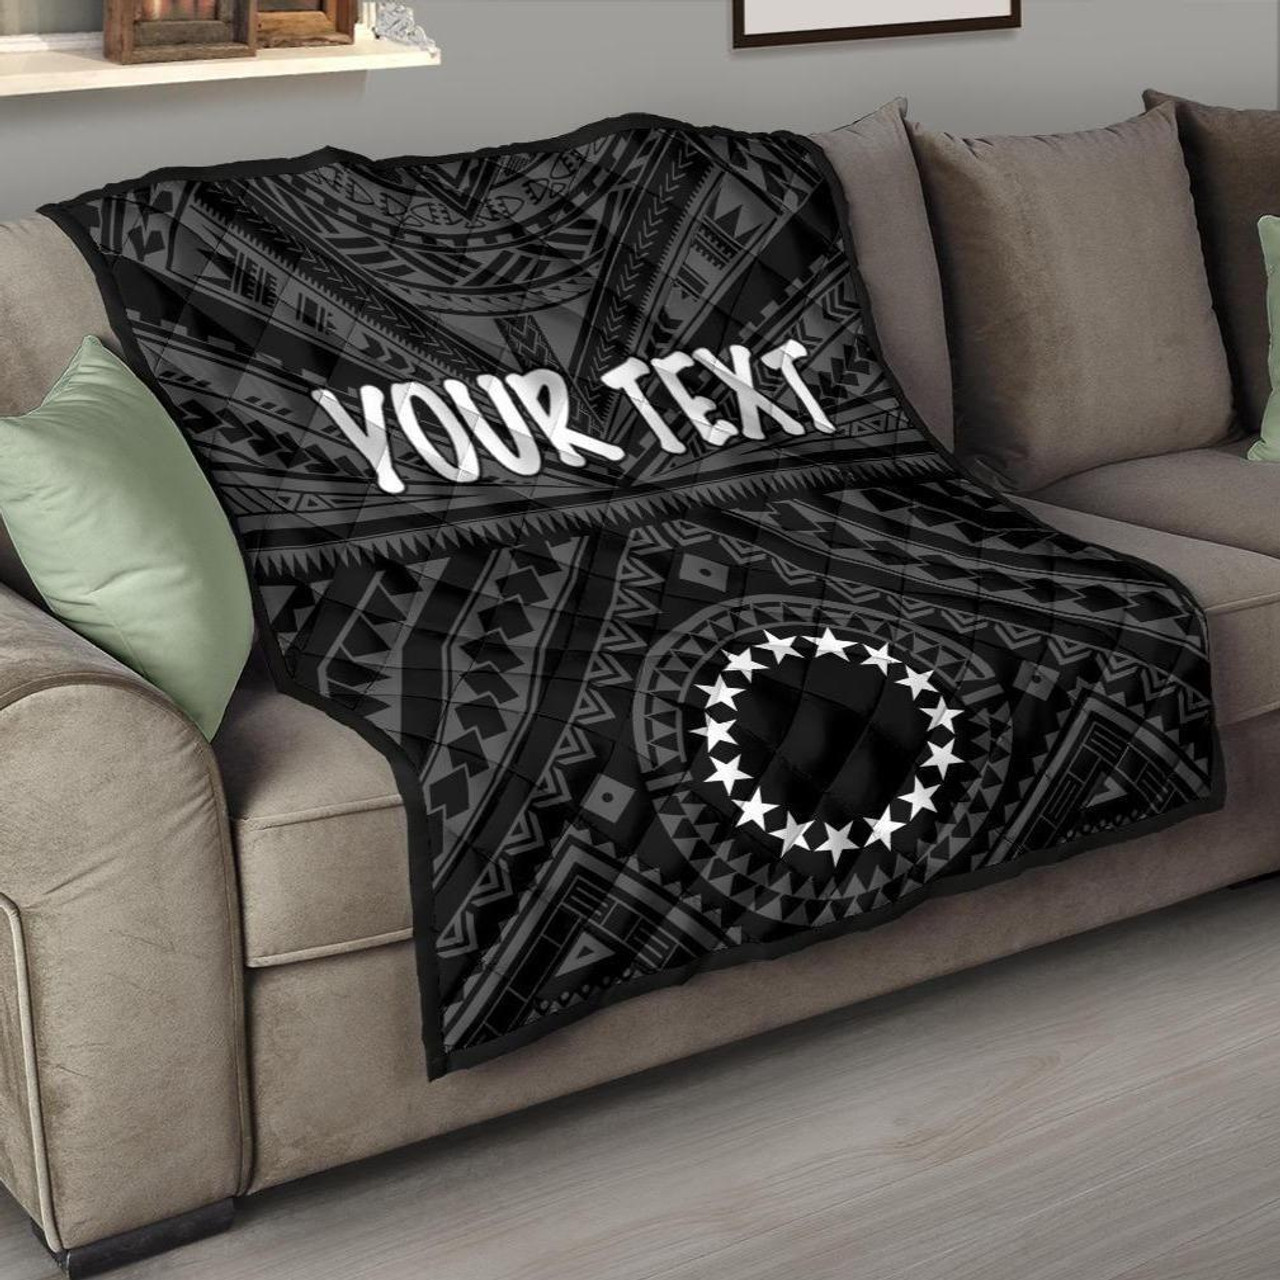 Cook Islands Personalised Premium Quilt - Seal With Polynesian Tattoo Style ( Black) 1